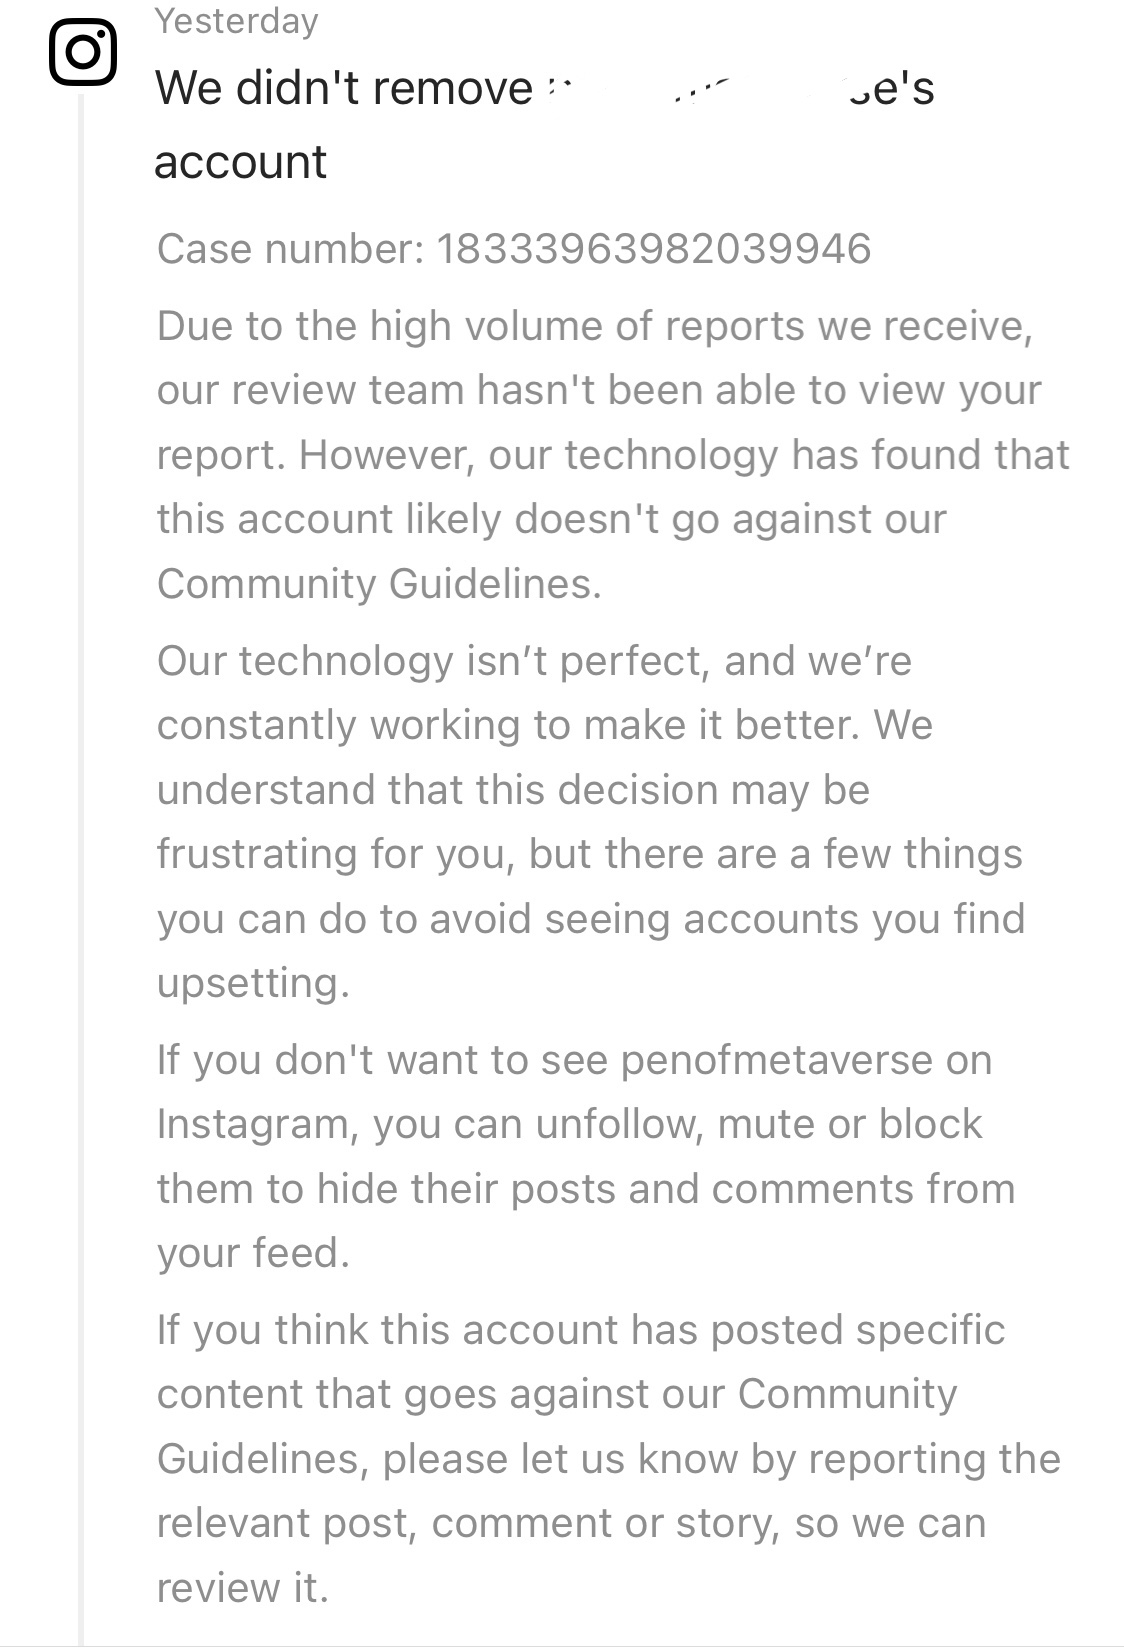 Screenshot of Instagram not removing a reported account